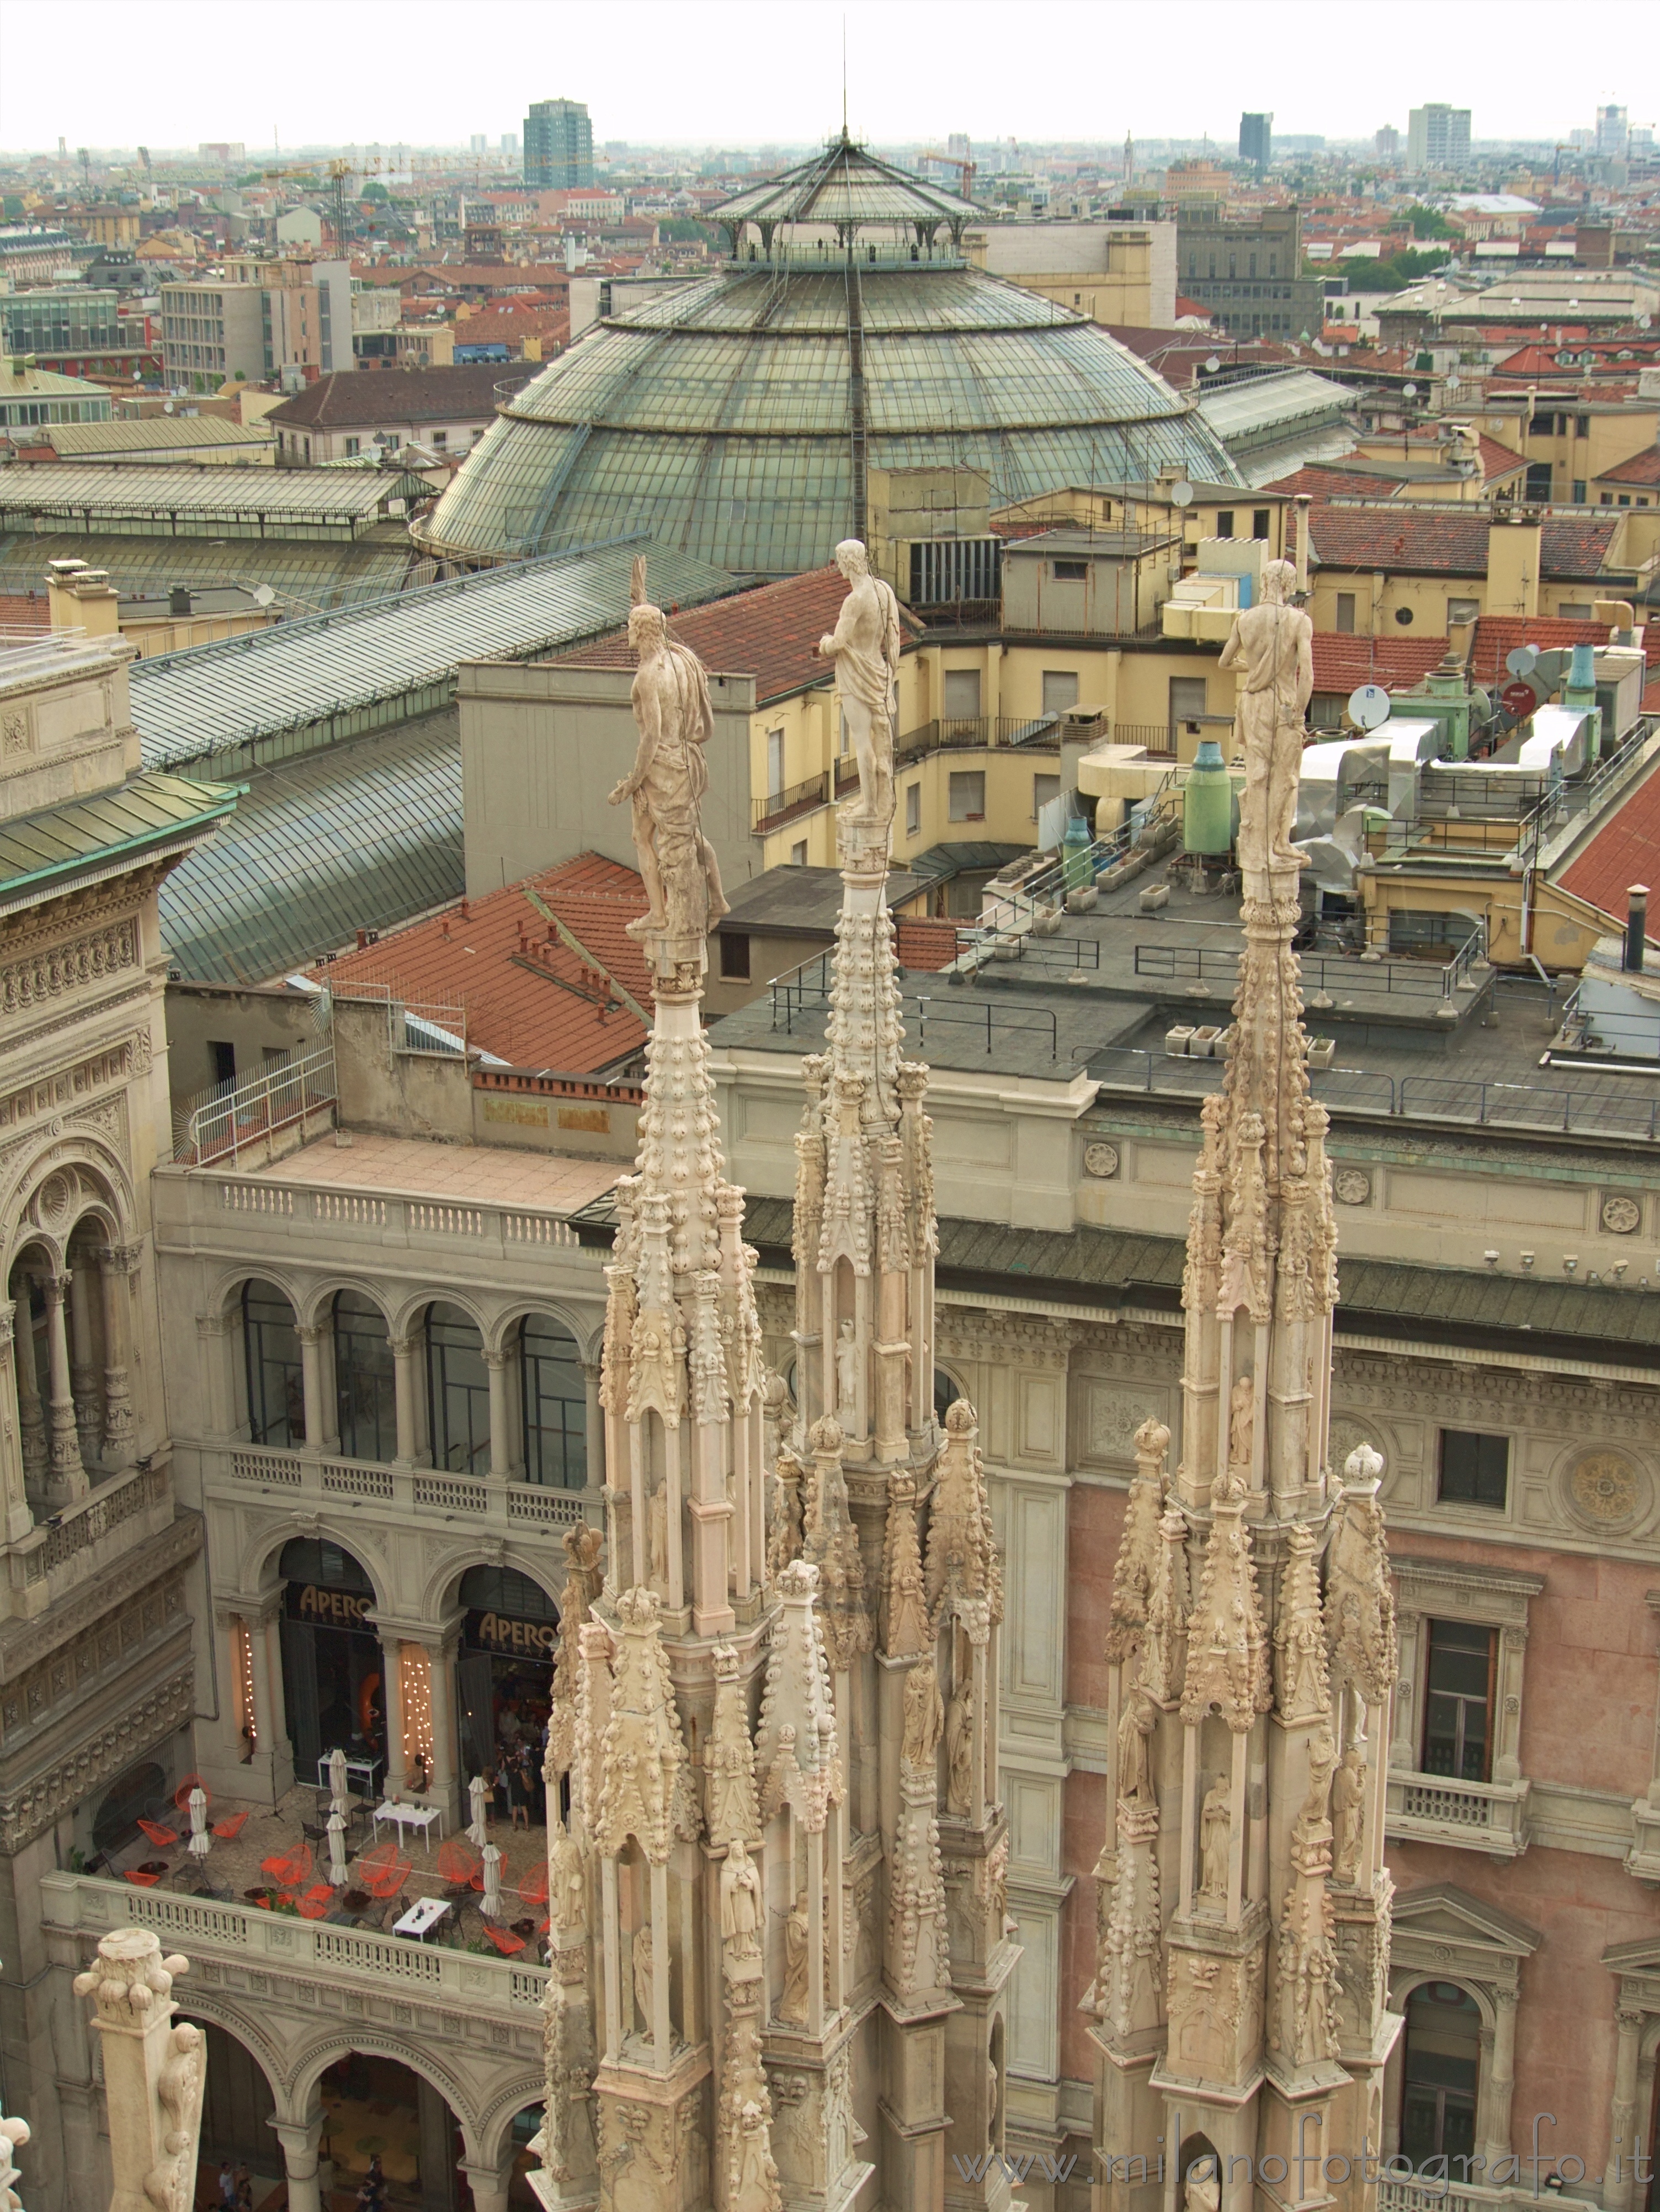 Milan (Italy): Sight from the roof of the Duomo - Milan (Italy)